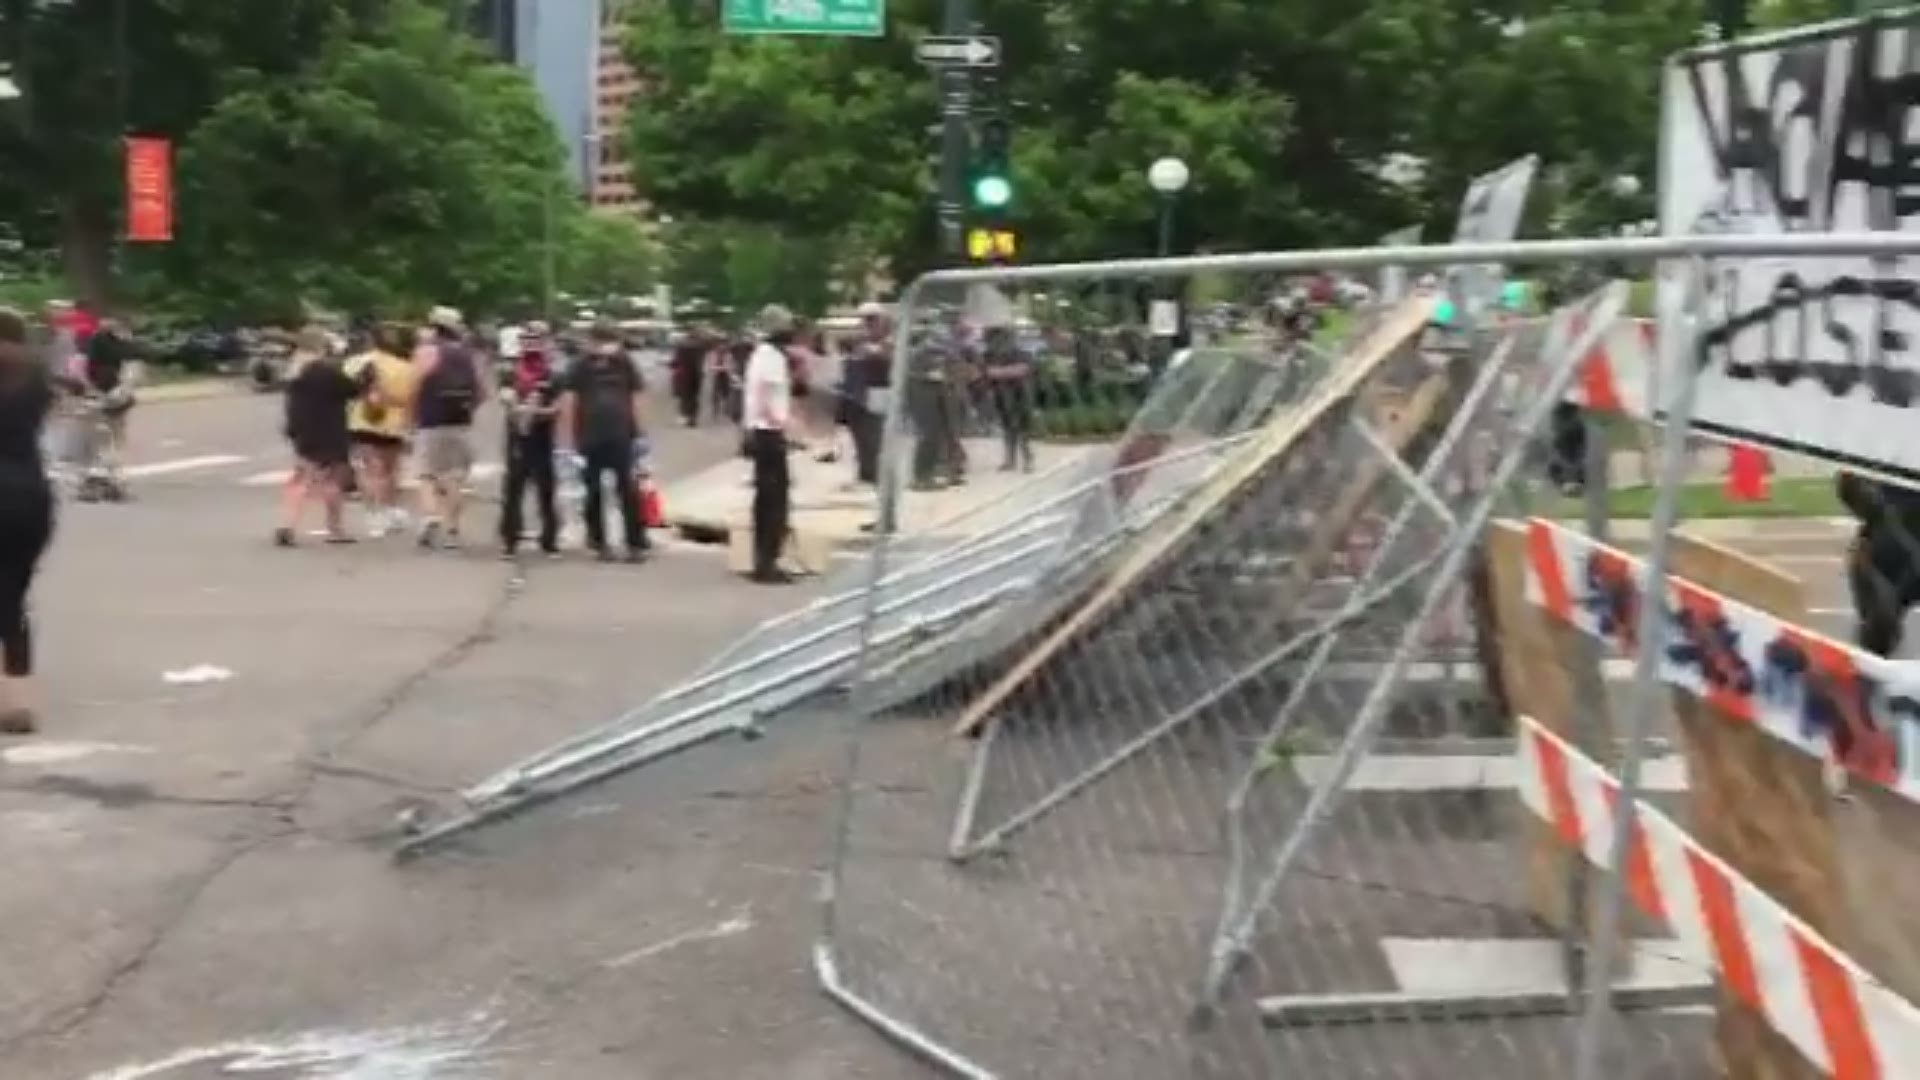 Protesters built a barricade from a chain link fence and road closure signs at 14th and Lincoln during the George Floyd protests on Saturday in Denver.